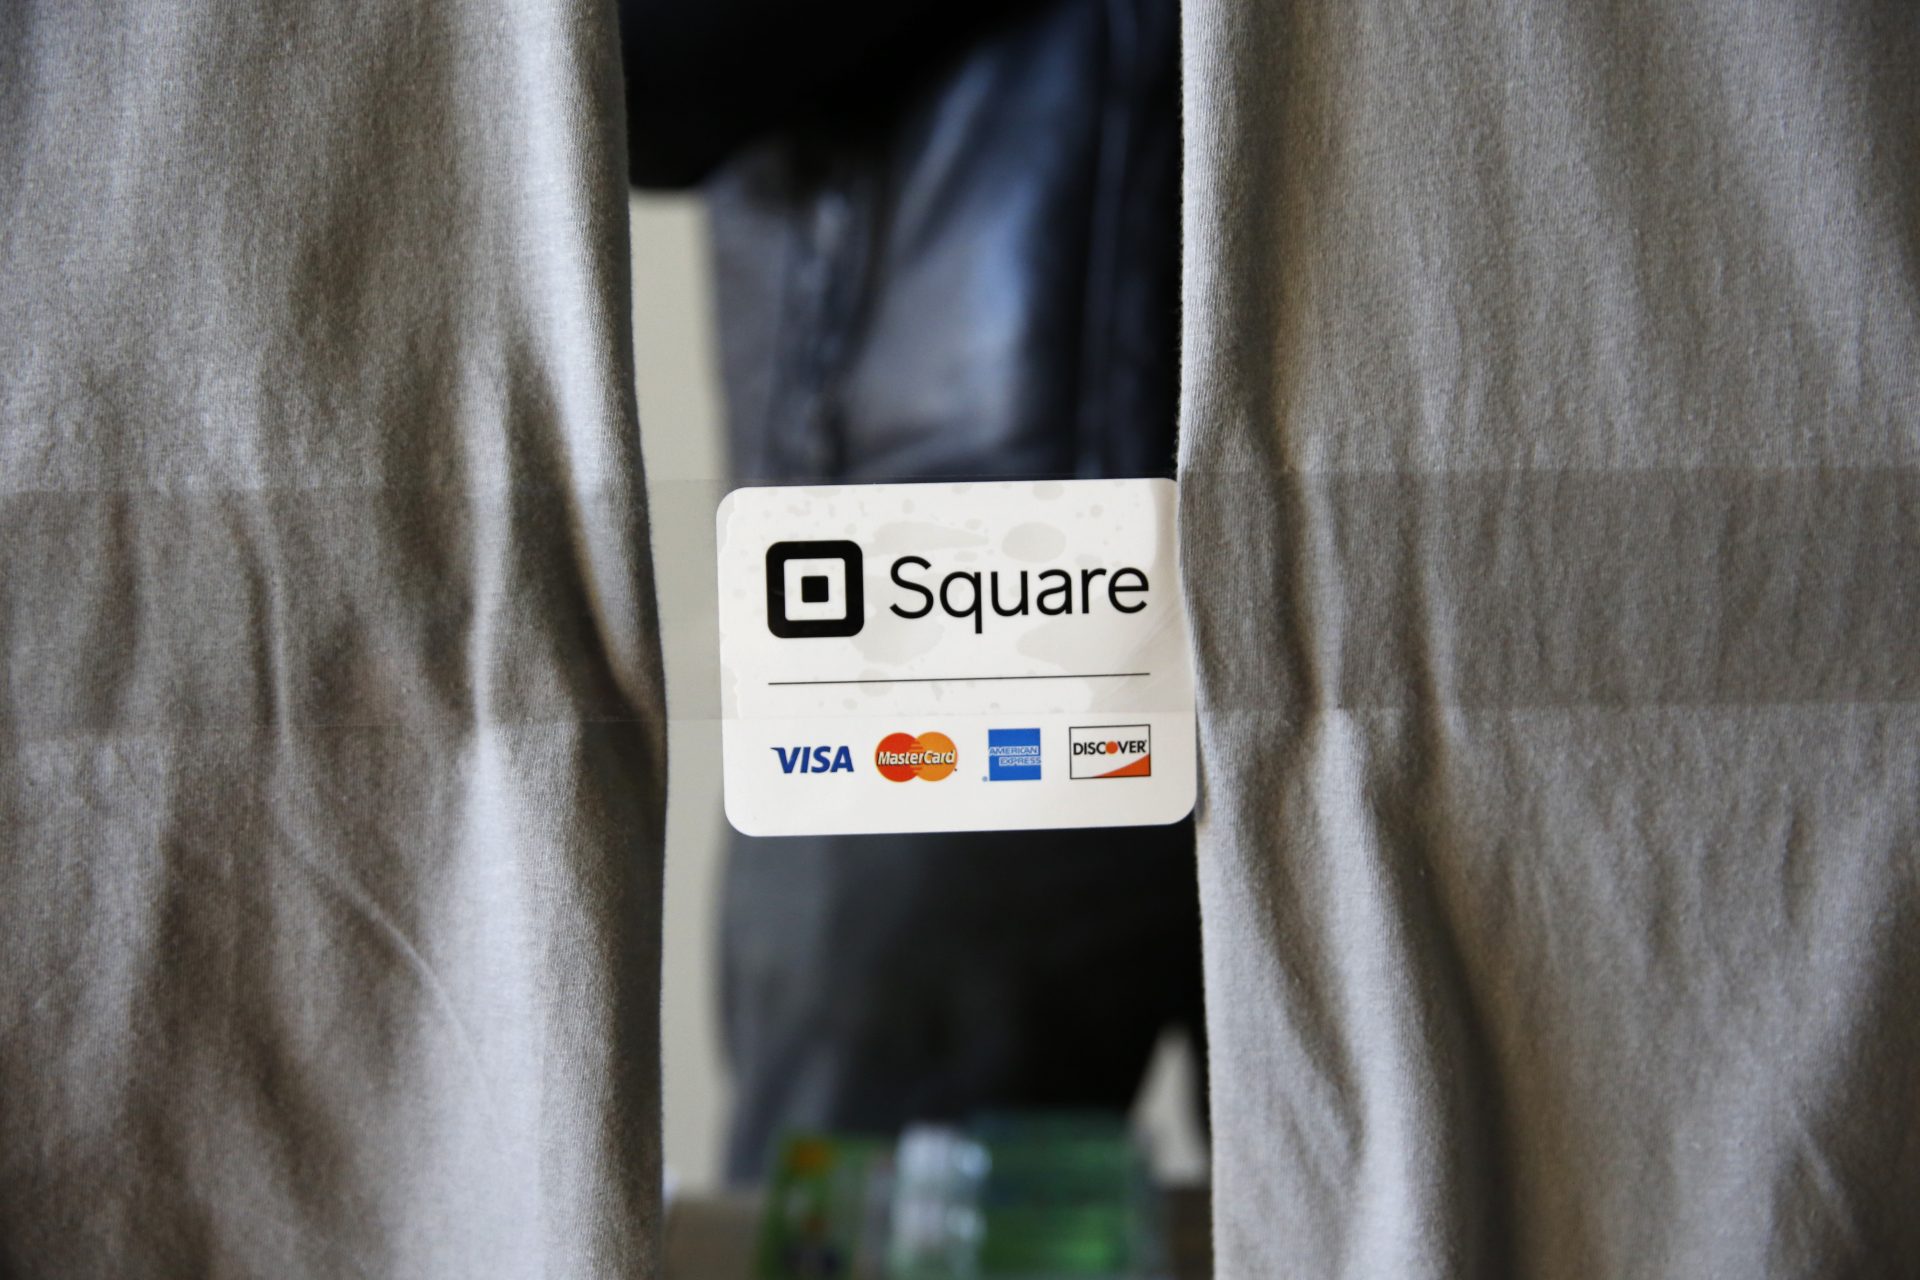 Sq. pays $29 billion to develop main ‘take now, pay later’ firm Afterpay